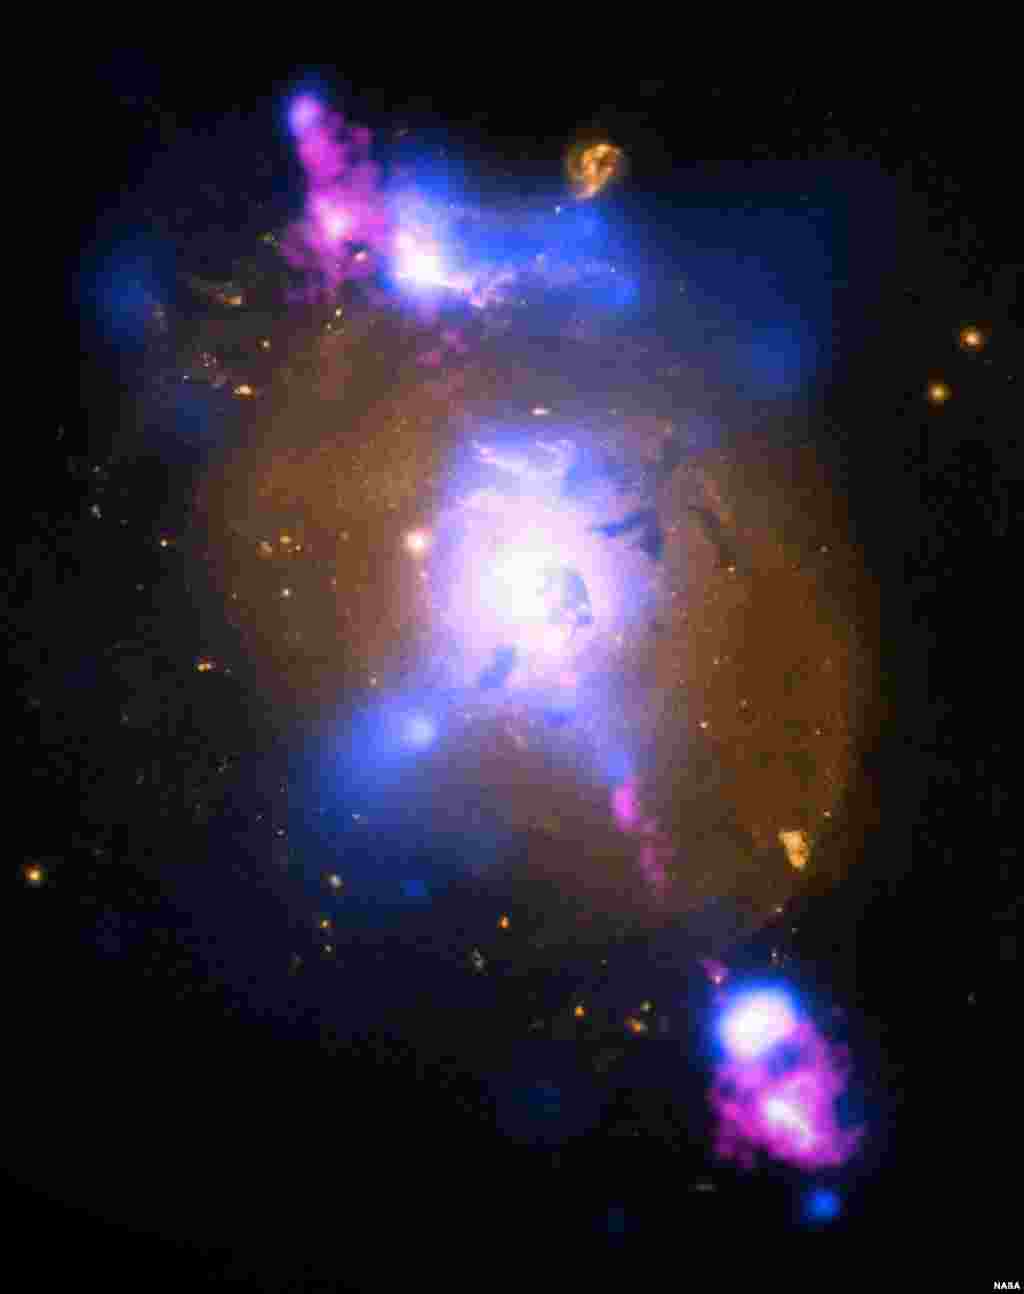 A composite image of a galaxy which illustrates how the intense gravity of a supermassive black hole can be tapped to generate immense power.